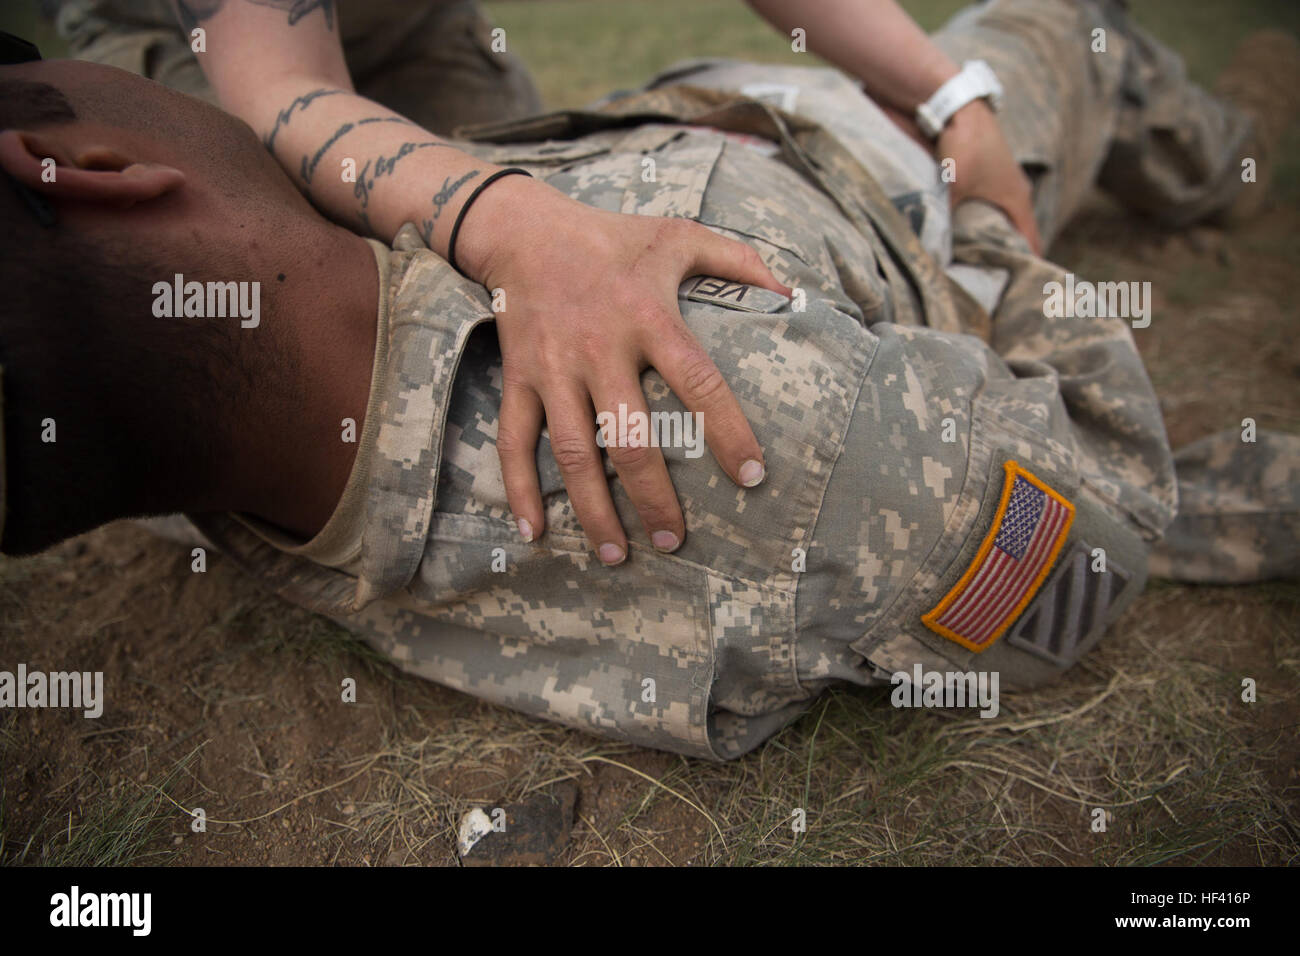 A U.S. Soldier with the Alaska Army National Guard places on a simulated casualty’s wound in a practical application exercise in the combat medical care lane of Khaan Quest 2016 at Five Hills Training Area near Ulaanbaatar, Mongolia May 30. The training equipped soldiers with essential life-saving skills and the ability to prioritize injuries and medical care. Khaan Quest 2016 is an annual, multinational peacekeeping operations exercise hosted by the Mongolian Armed Forces, co-sponsored by U.S. Pacific Command, and supported by U.S. Army Pacific and U.S. Marine Corps Forces, Pacific. Khaan Que Stock Photo